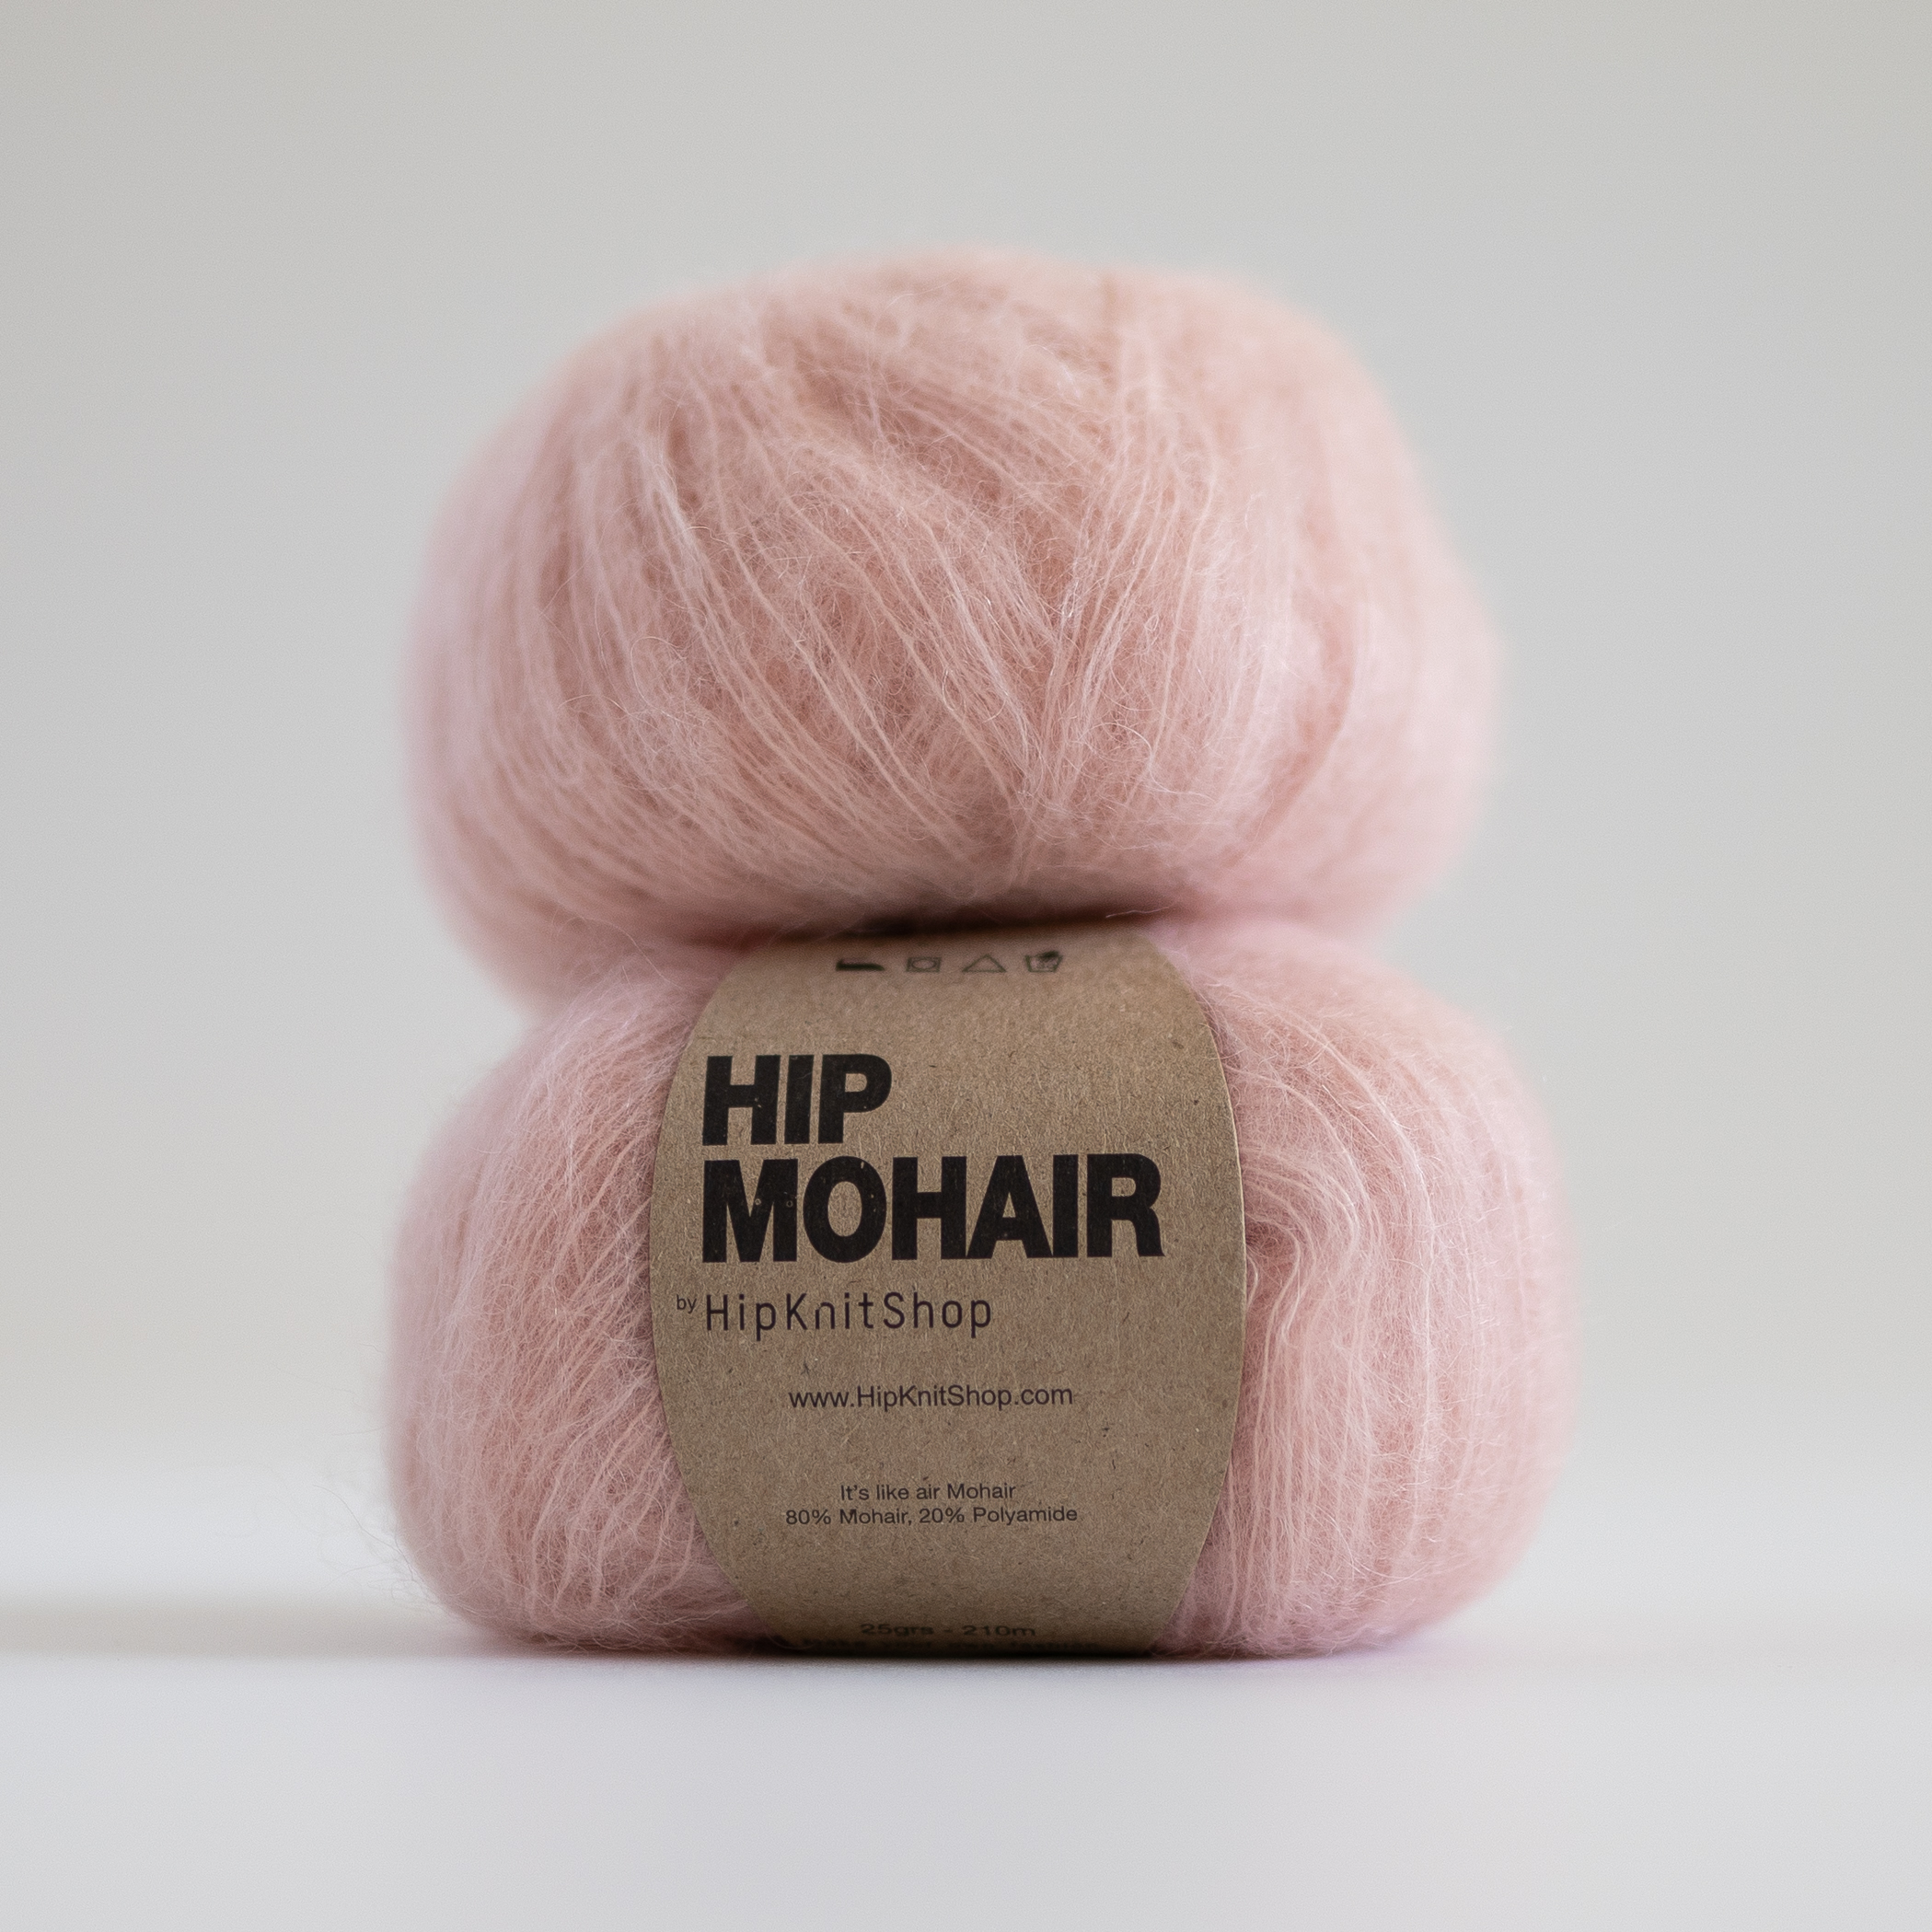  - Candyfloss mohair | Hip Mohair light pink yarn - by HipKnitShop - 02/07/2019